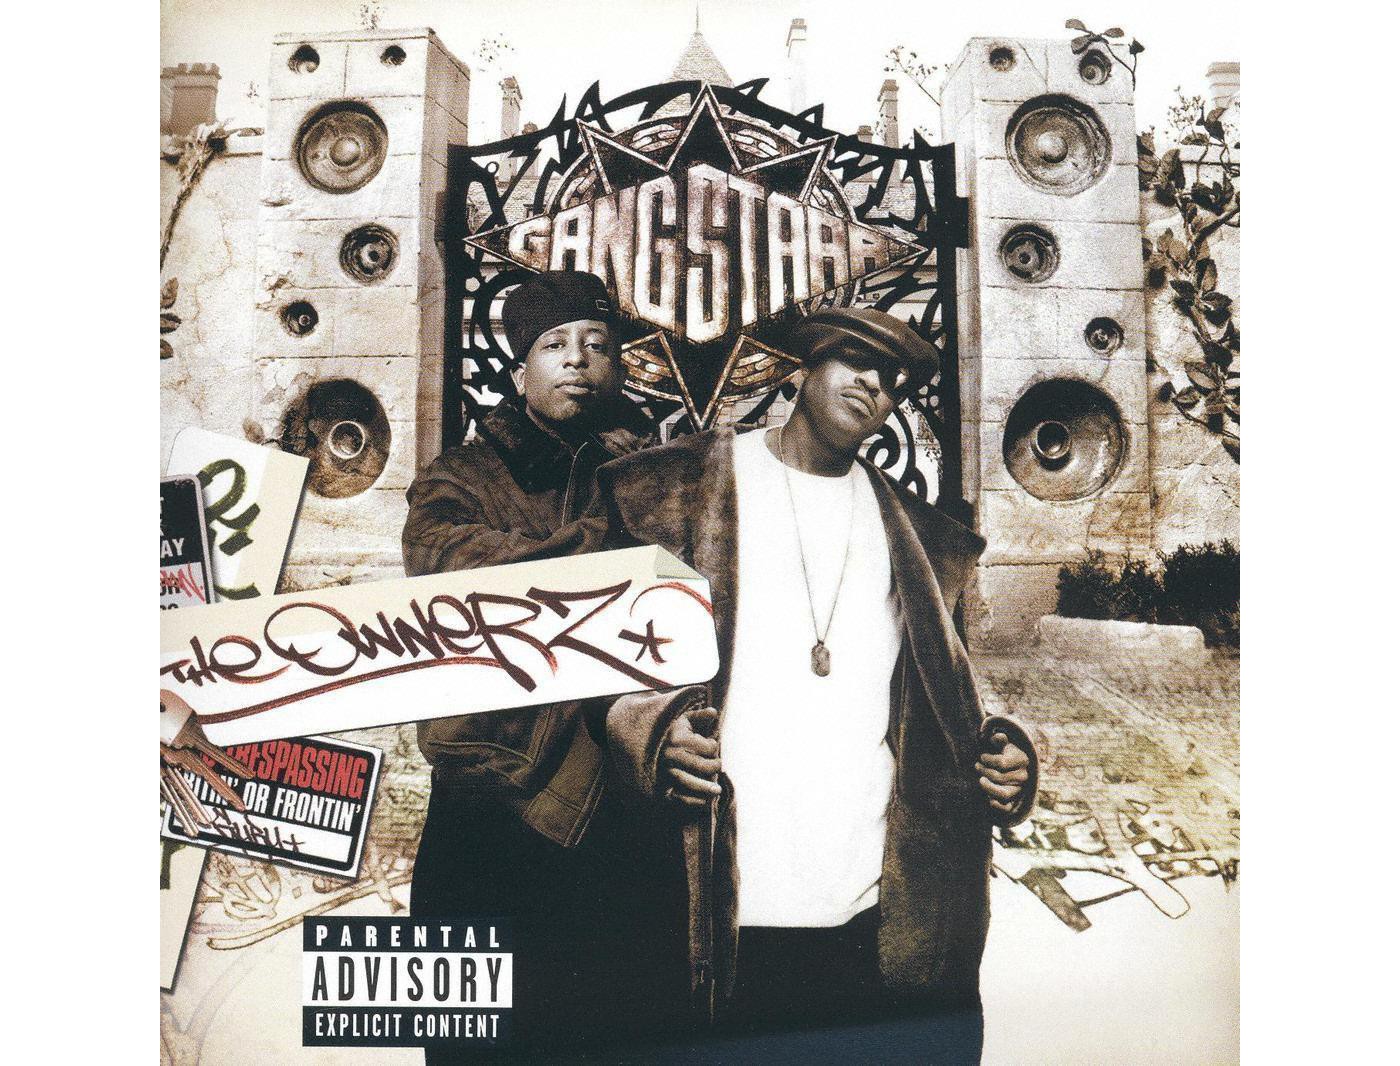 Gang Starr -The Ownerz